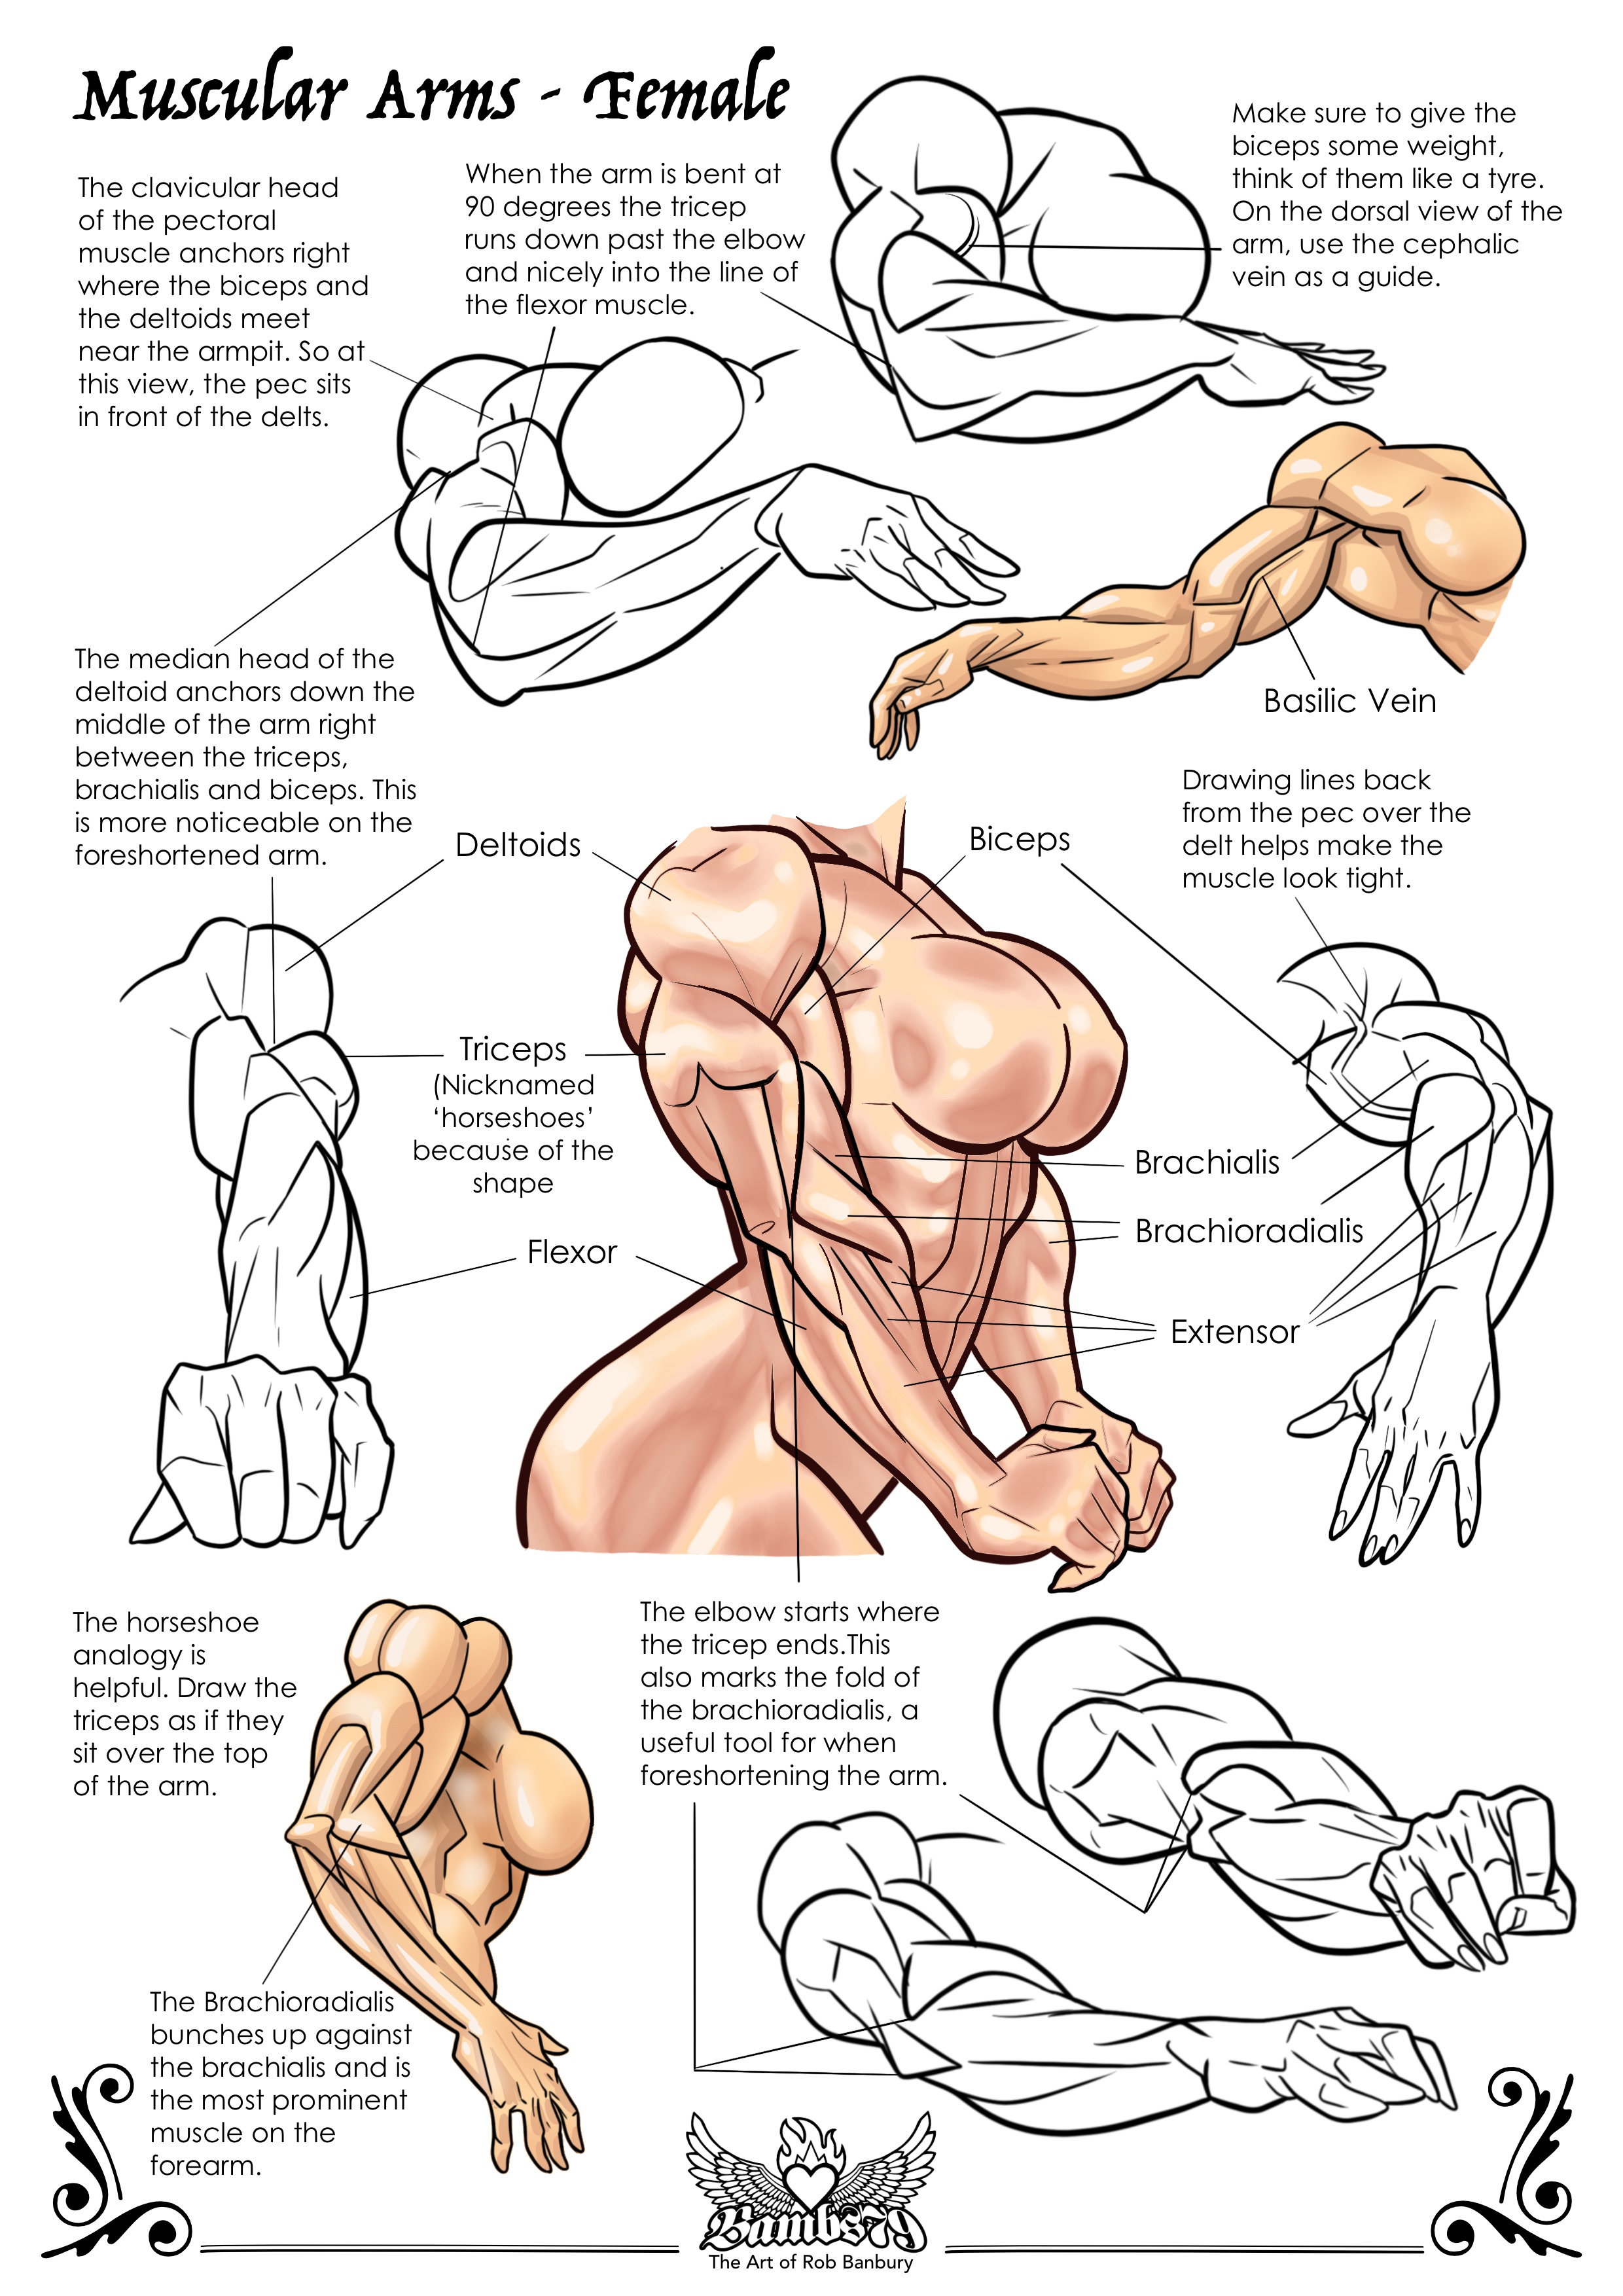 Muscular Arms - Female by Bambs79 on DeviantArt